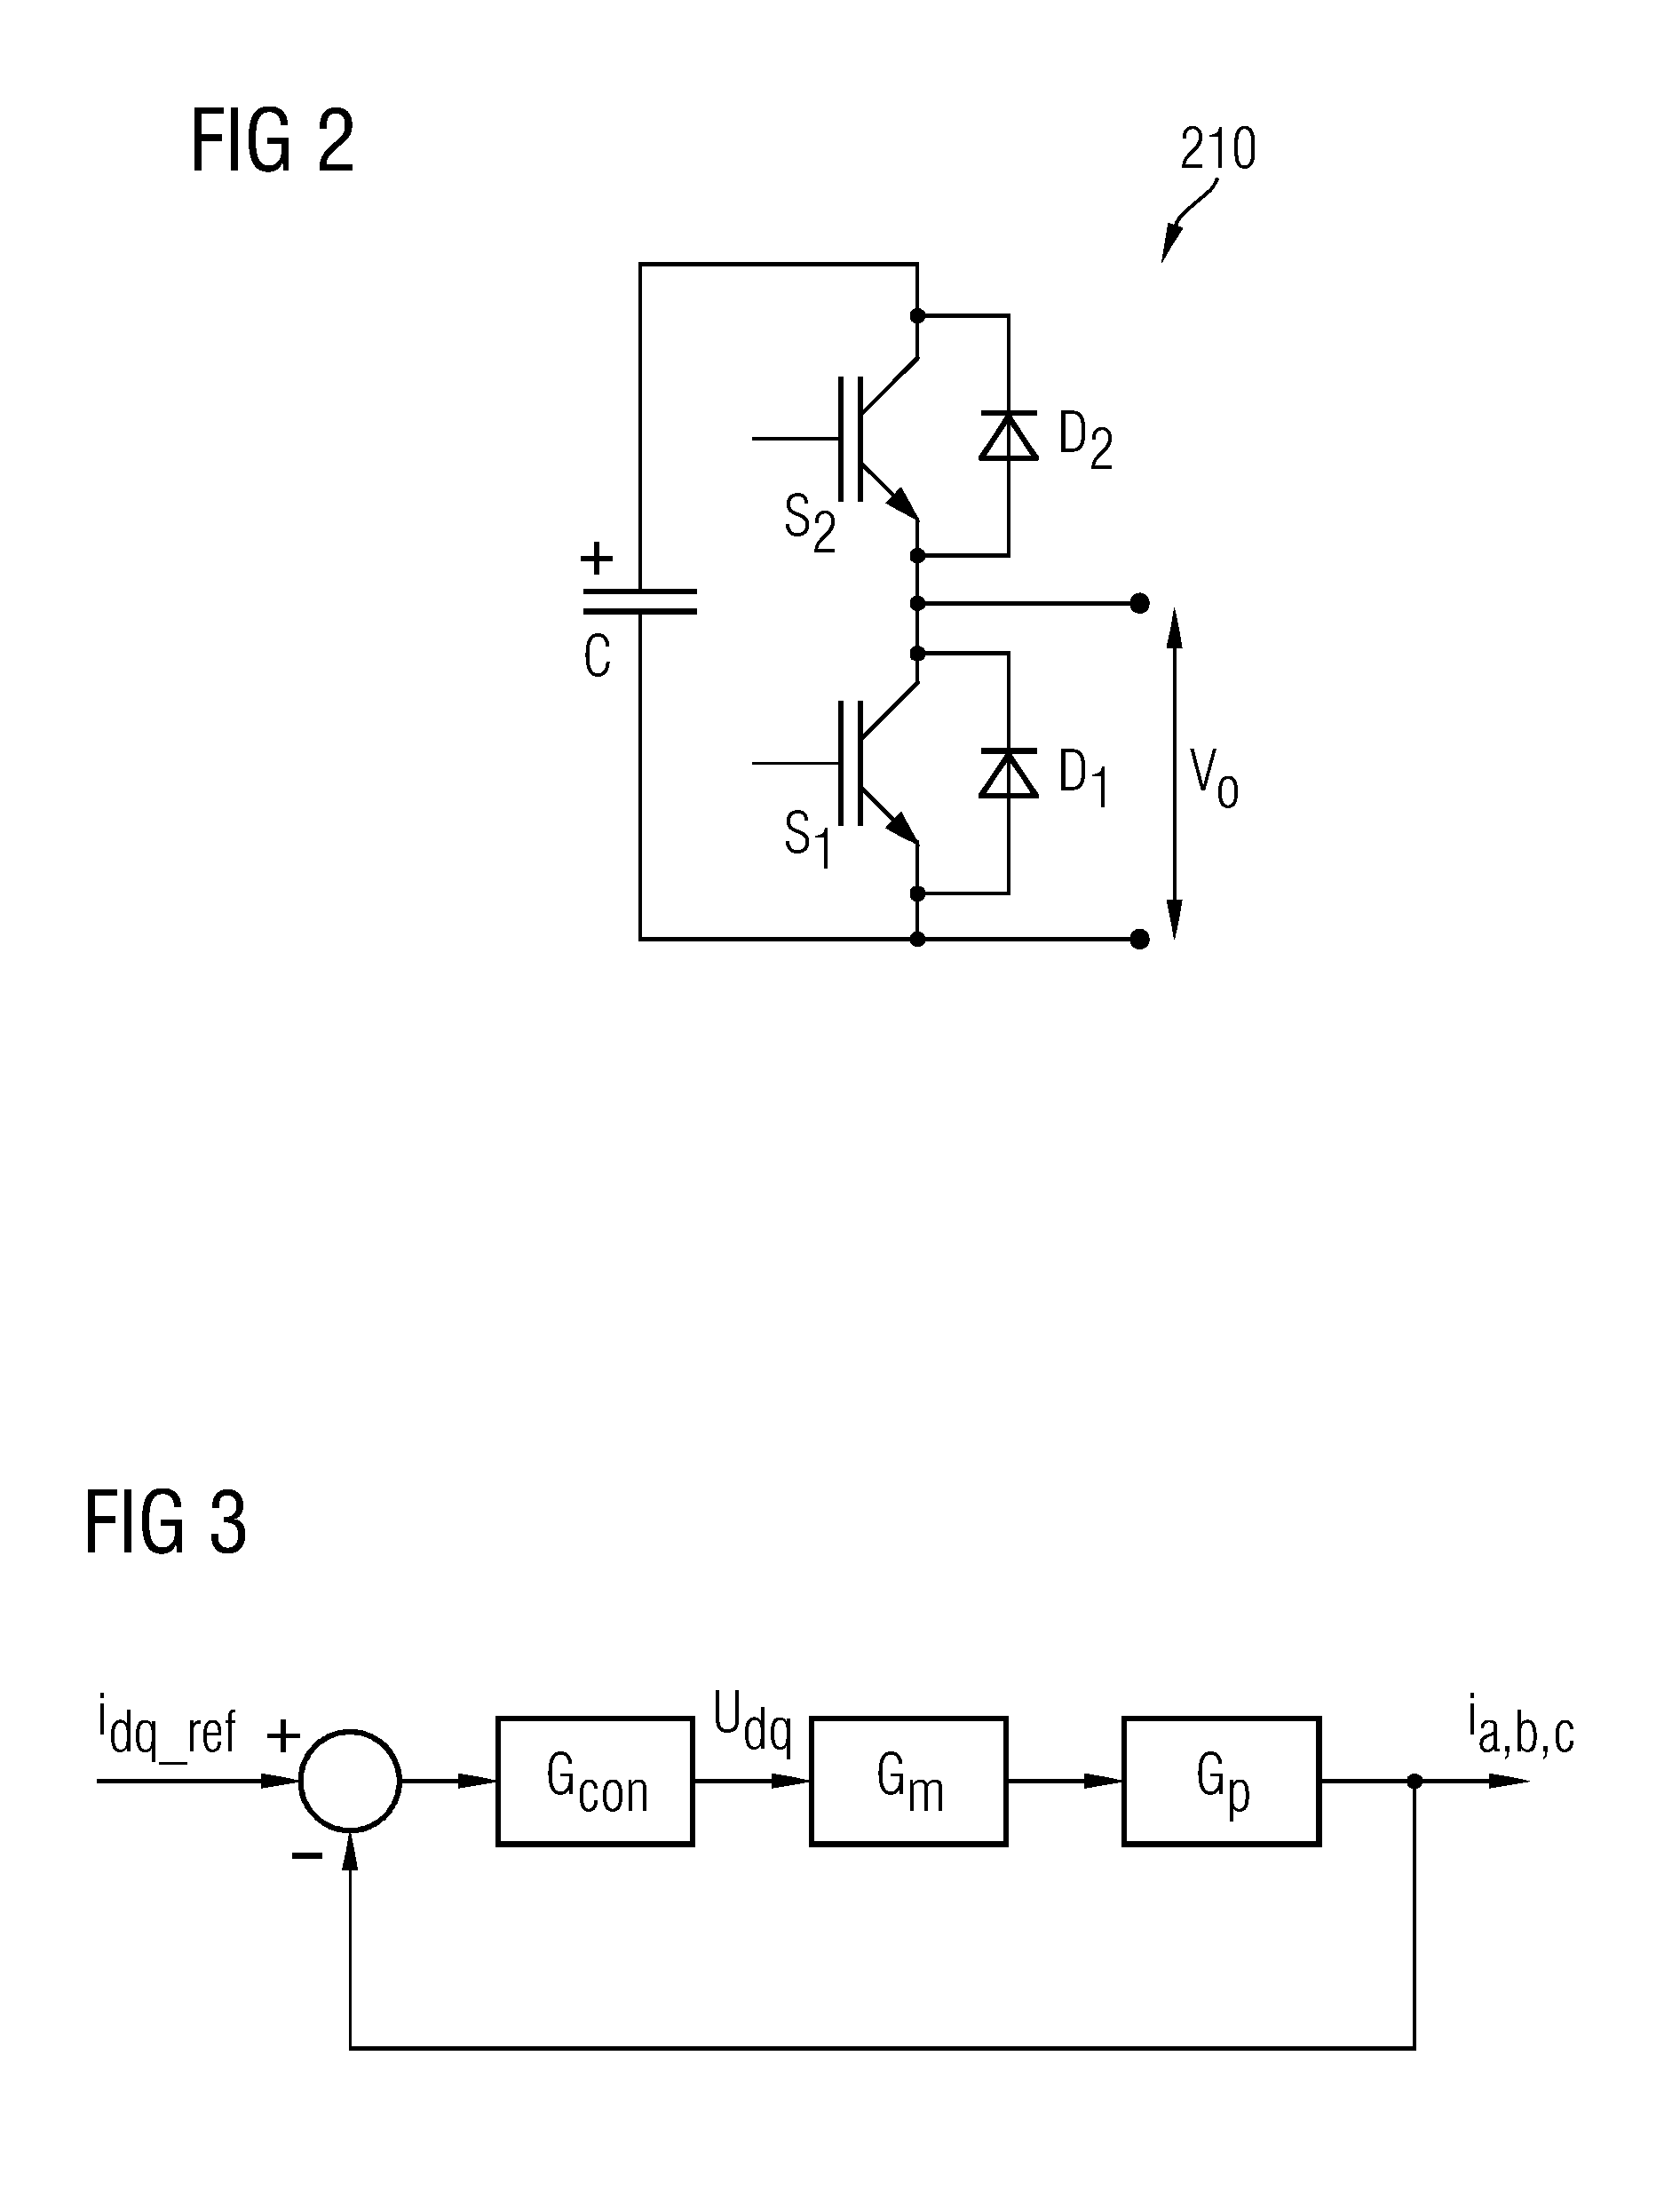 Controlling Operation of a Converter Having a Plurality of Semiconductor Switches for Converting High Power Electric Signals from DC to AC or from AC to DC